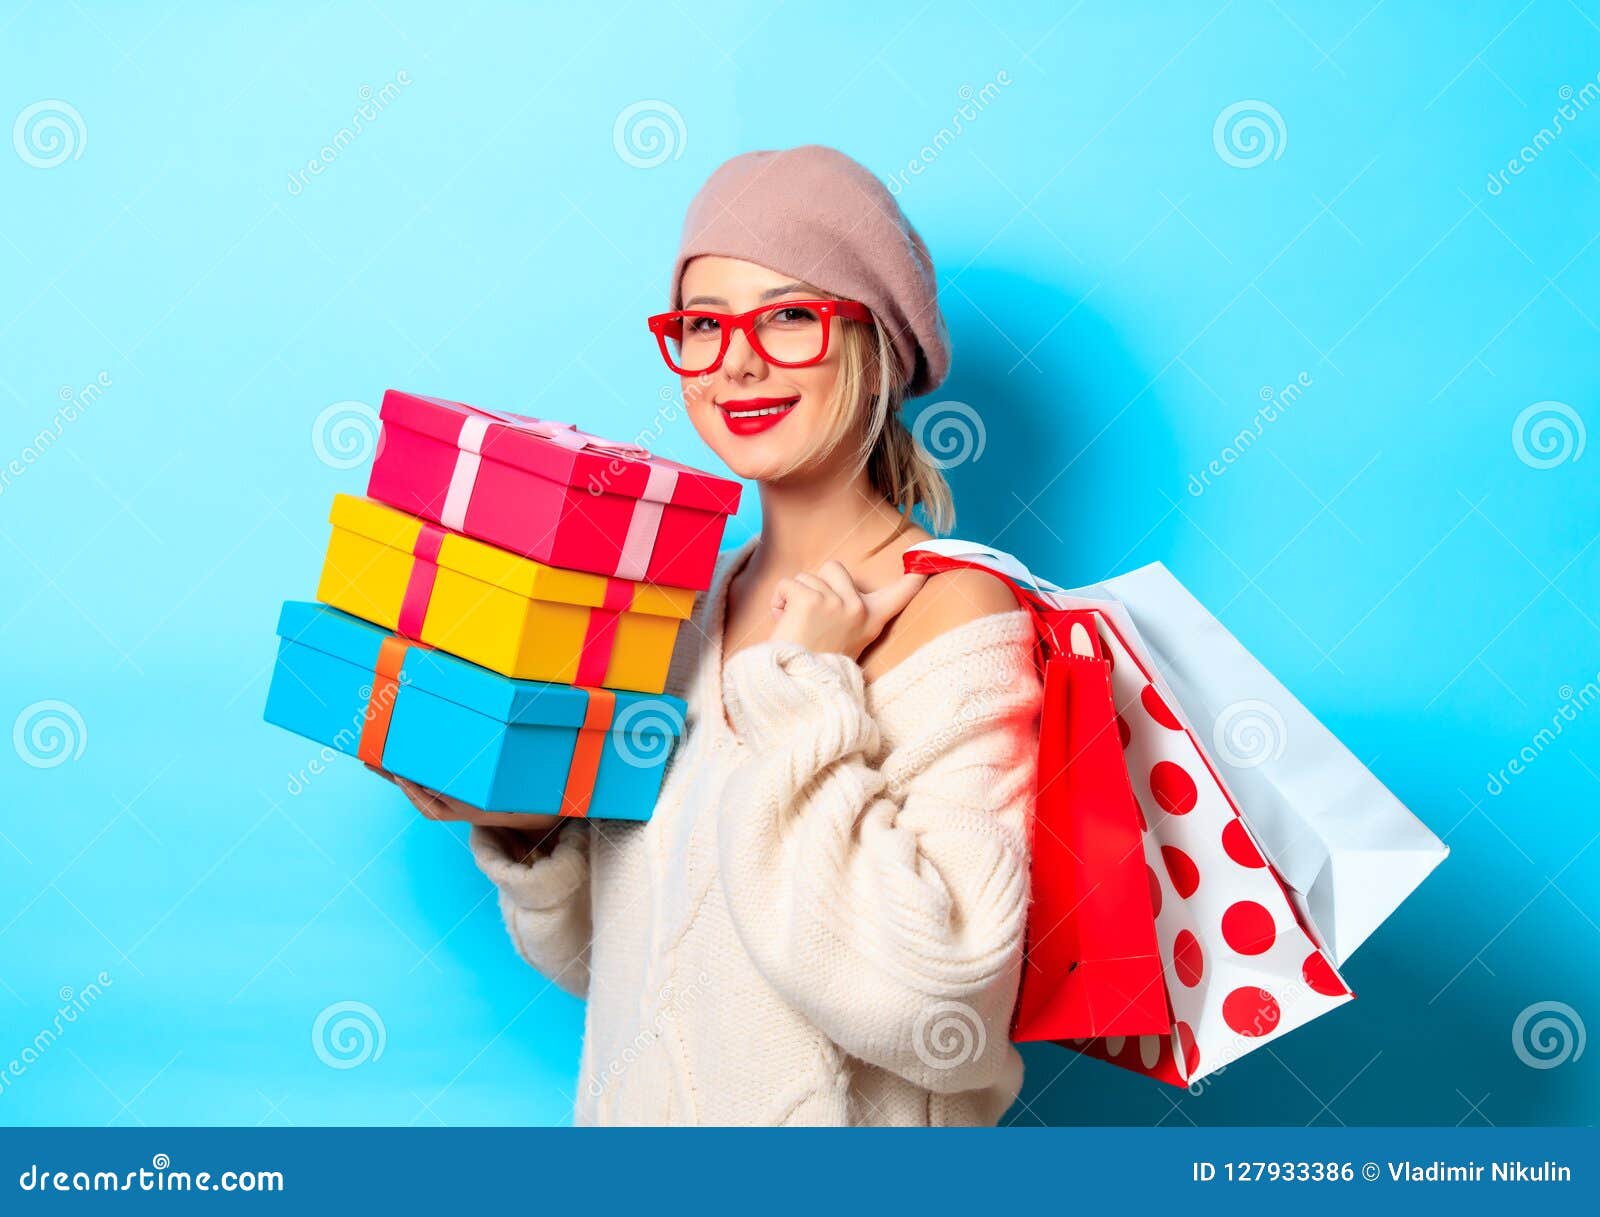 Girl with Gift Boxes and Shopping Bags Stock Photo